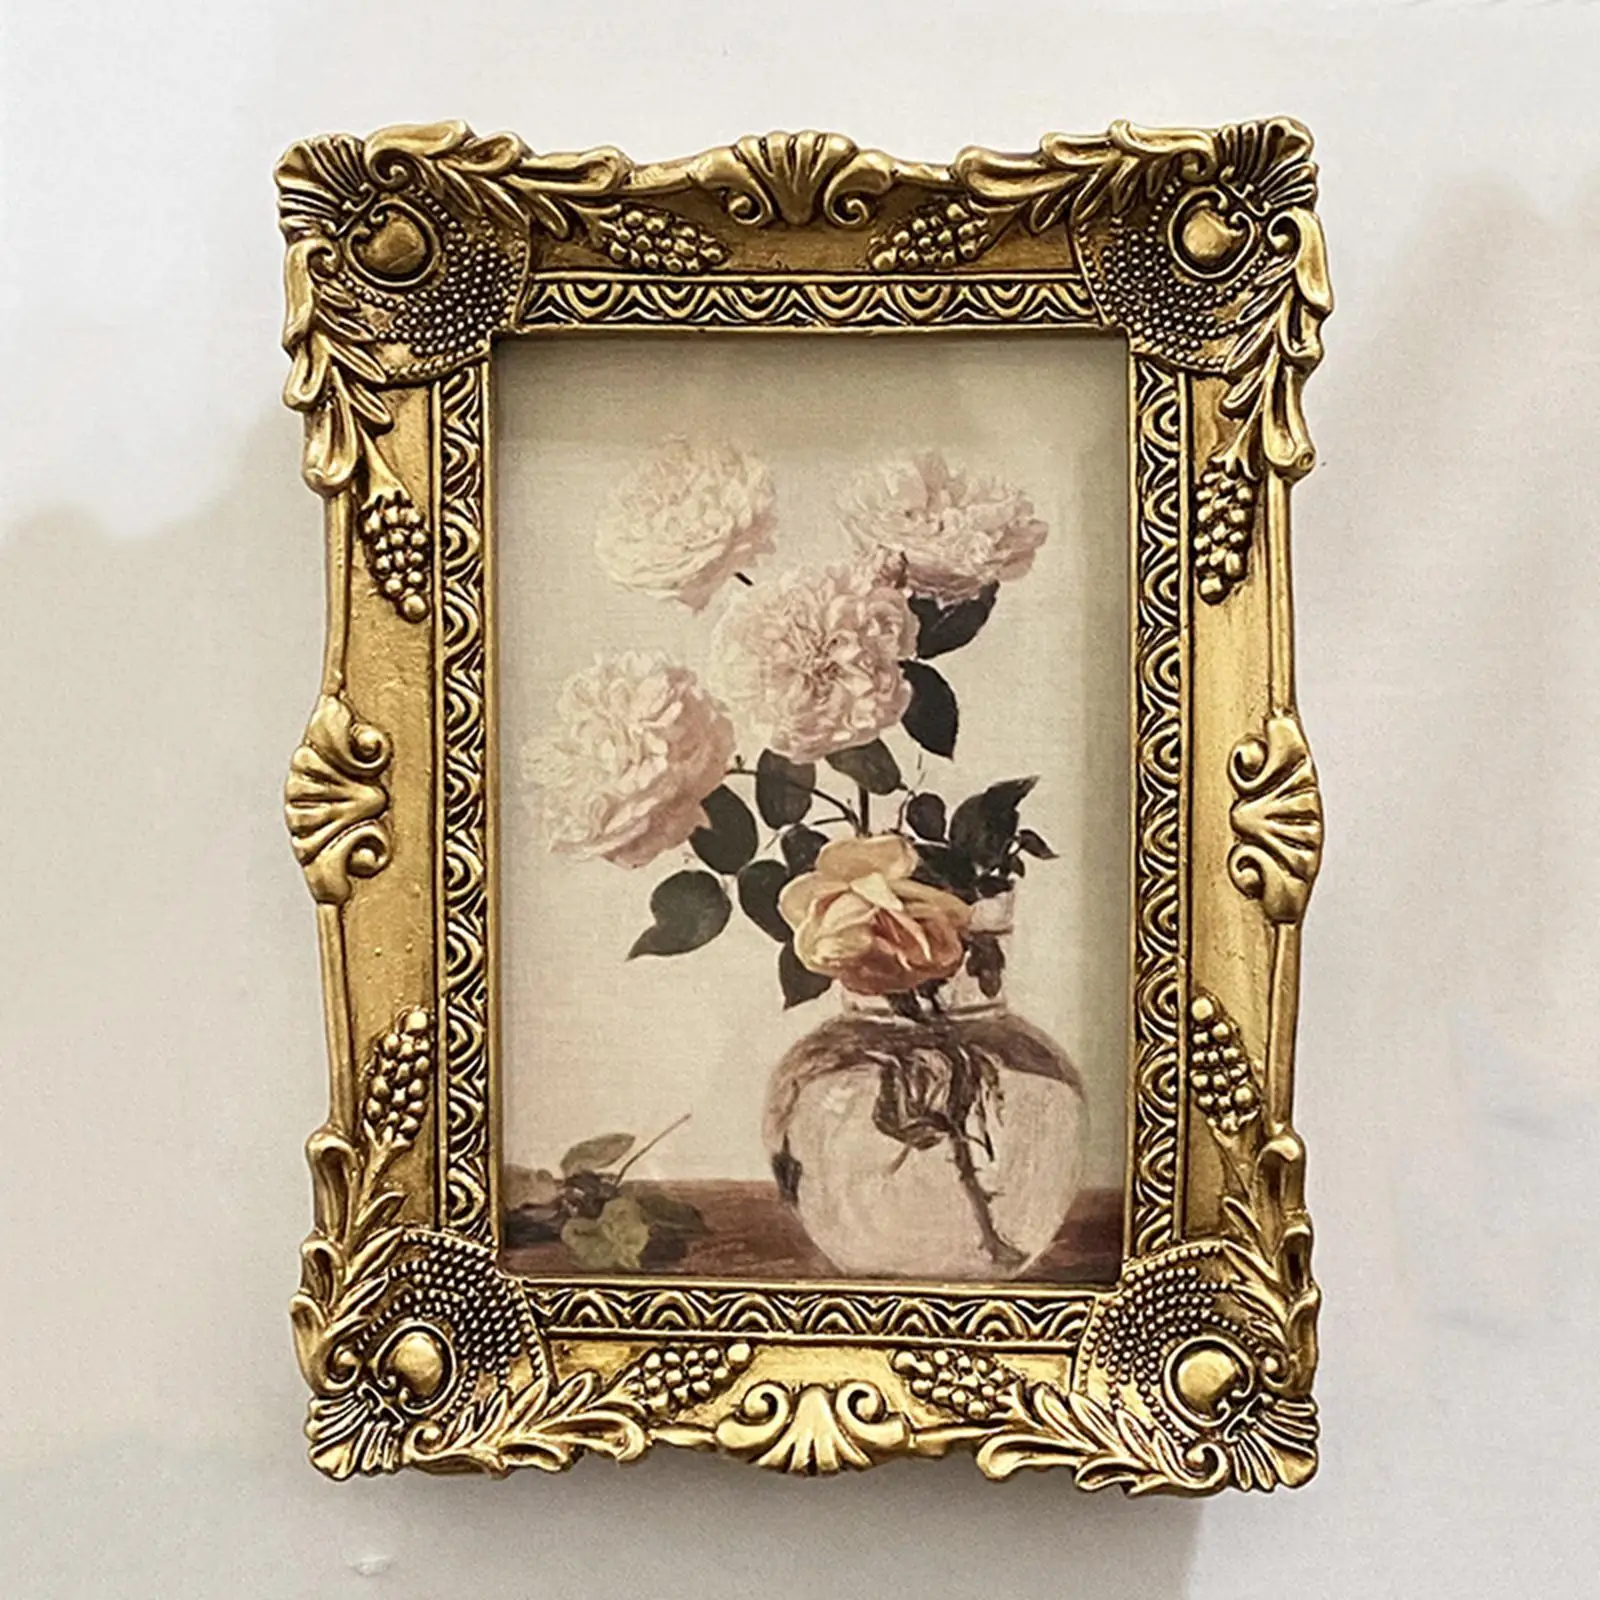 Baroque Photo Frame Retro Style Hanging Artwork Ornate Picture Frame Ornament for Office Wedding Gallery Hallway Home Decor